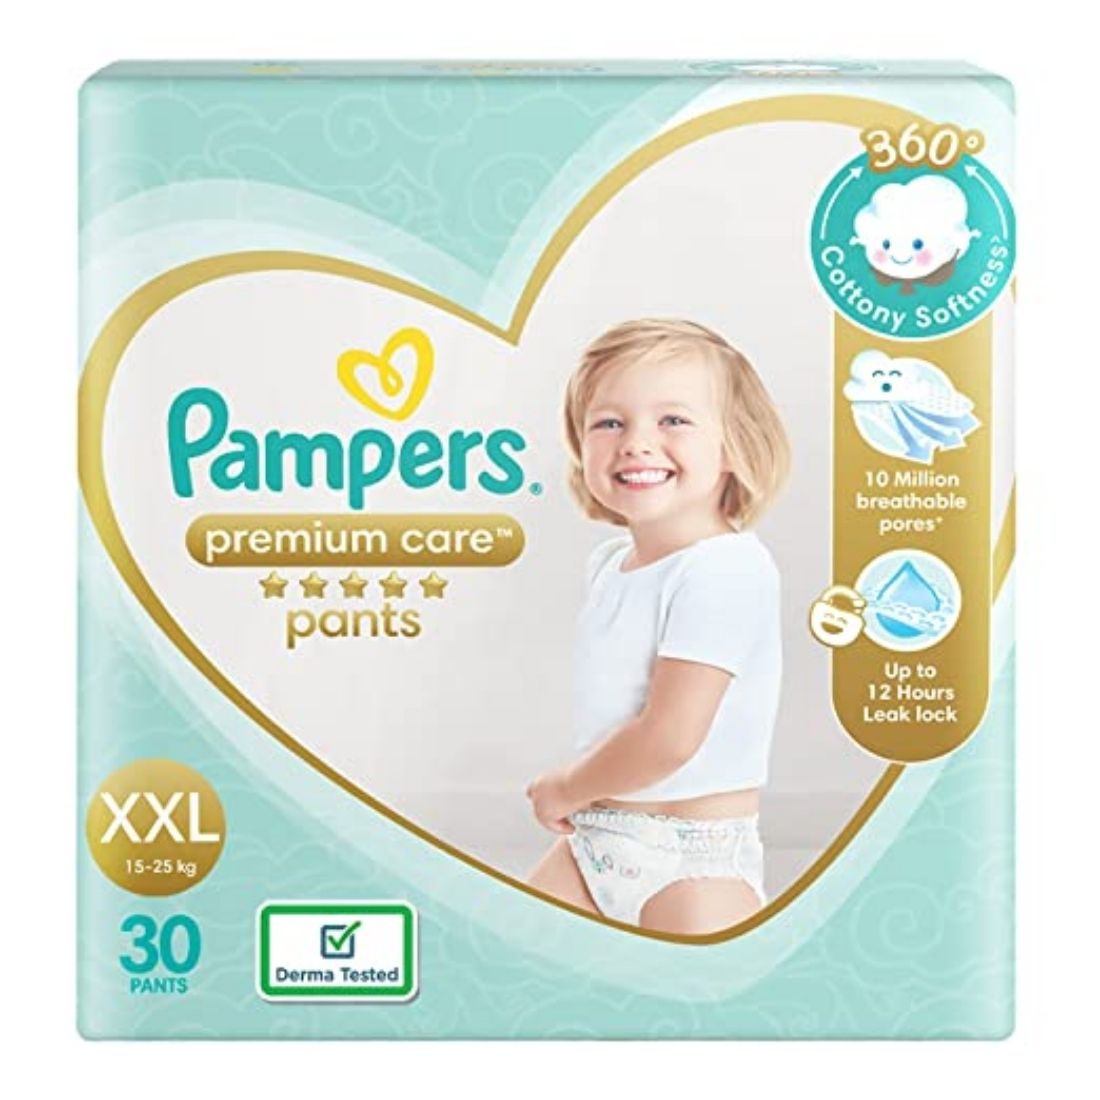 Pampers Premium Care Diaper Pants, Baby Diapers with Aloe Vera